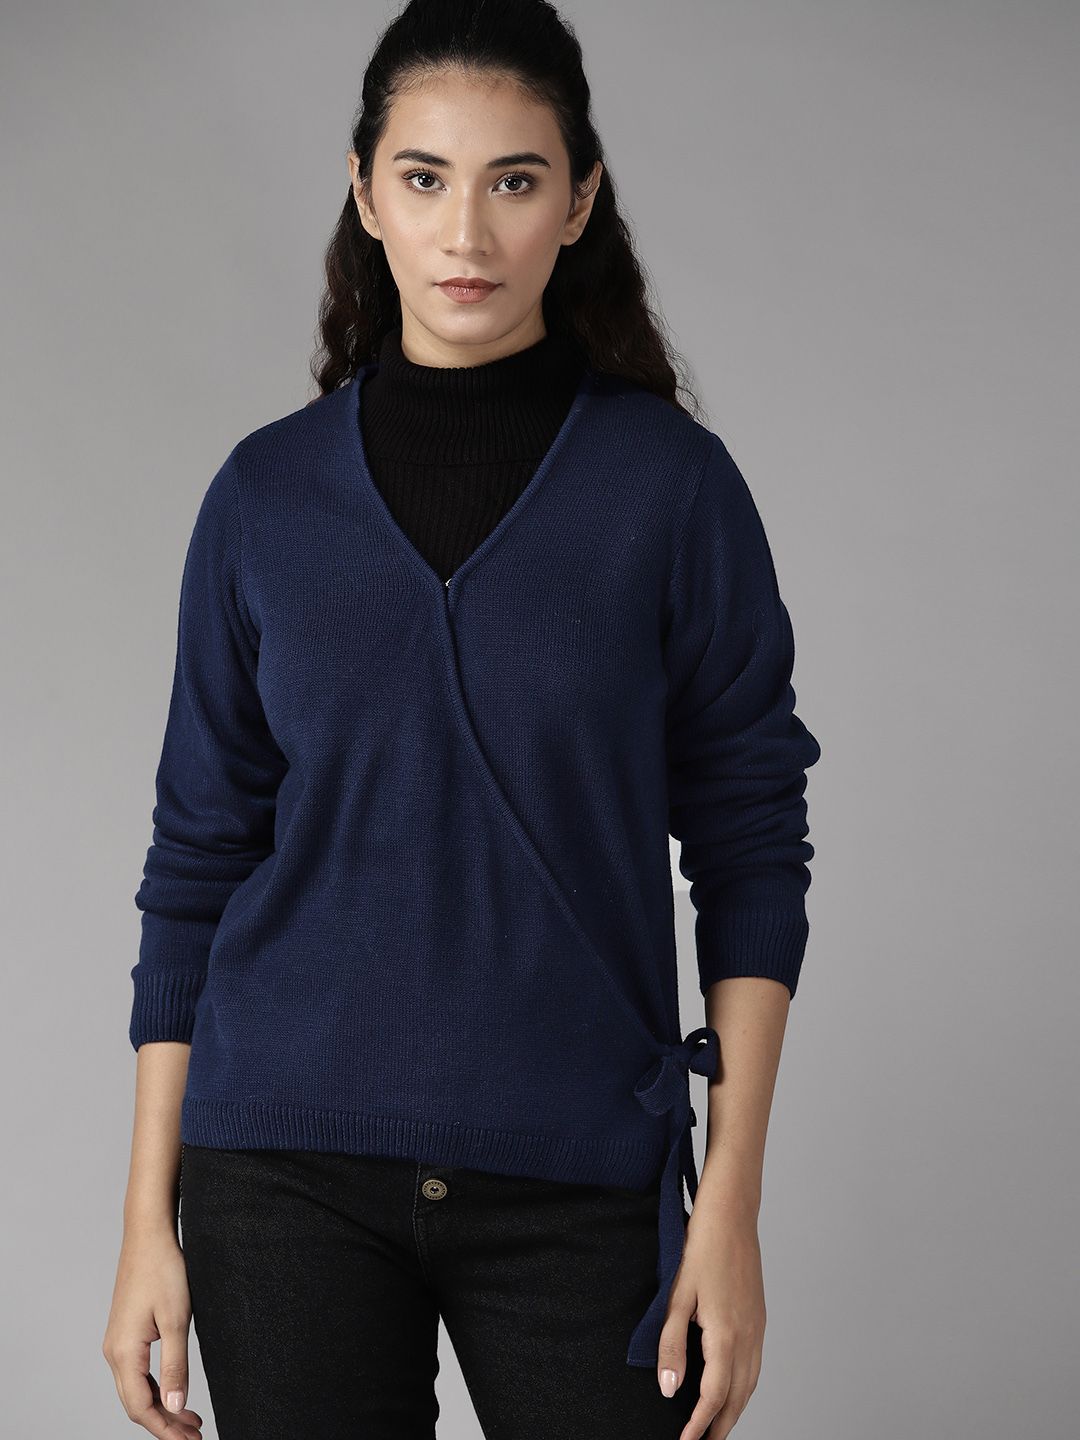 Roadster Women Navy Blue Solid Wrap Sweater Price in India